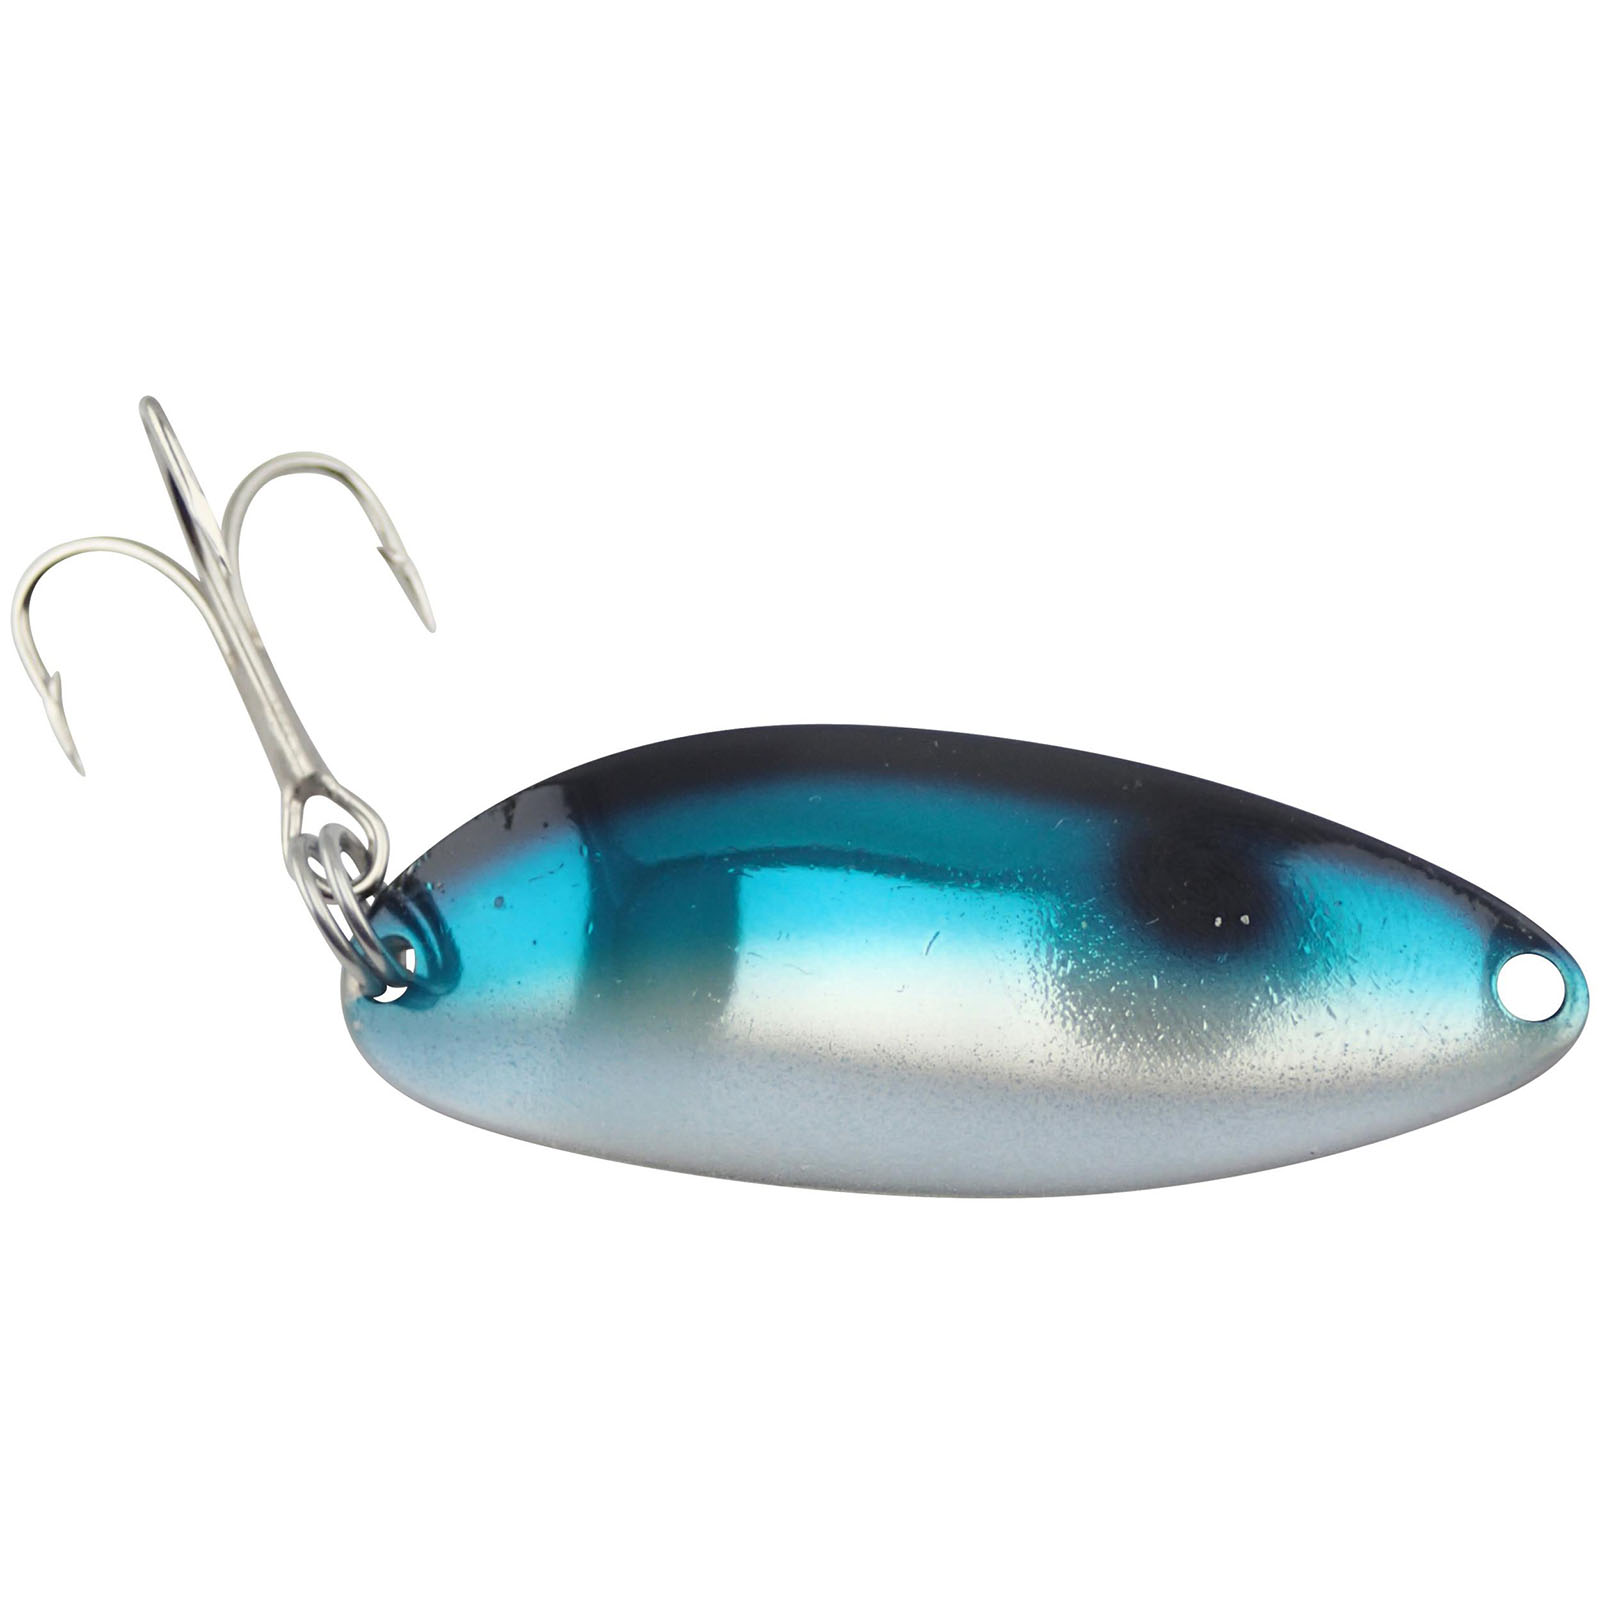 Acme Little Cleo 2/5 oz Glow/Blue Anchovy